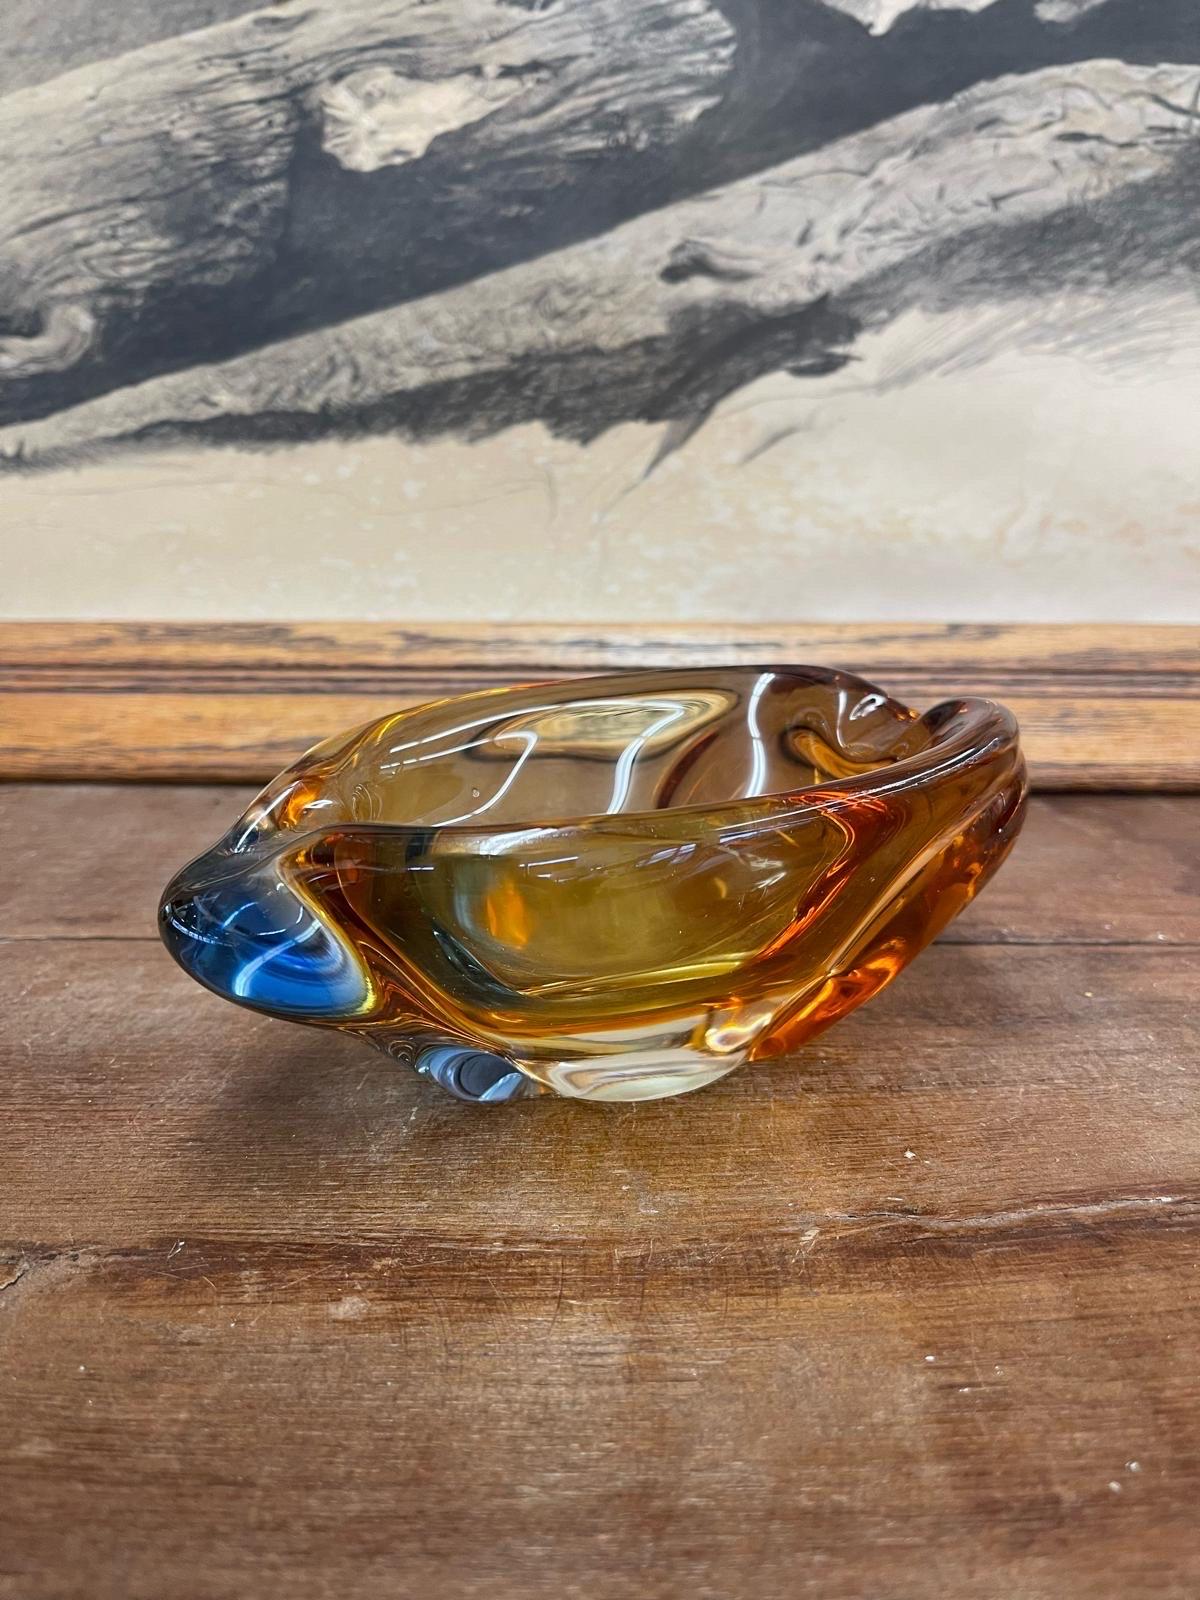 Beautifully shaped Ashtray with orange and blue coloring. No Makers mark. Vintage Condition Consistent with Age as Pictured.

Dimensions. 7 W ; 4 D ; 2 1/2 G